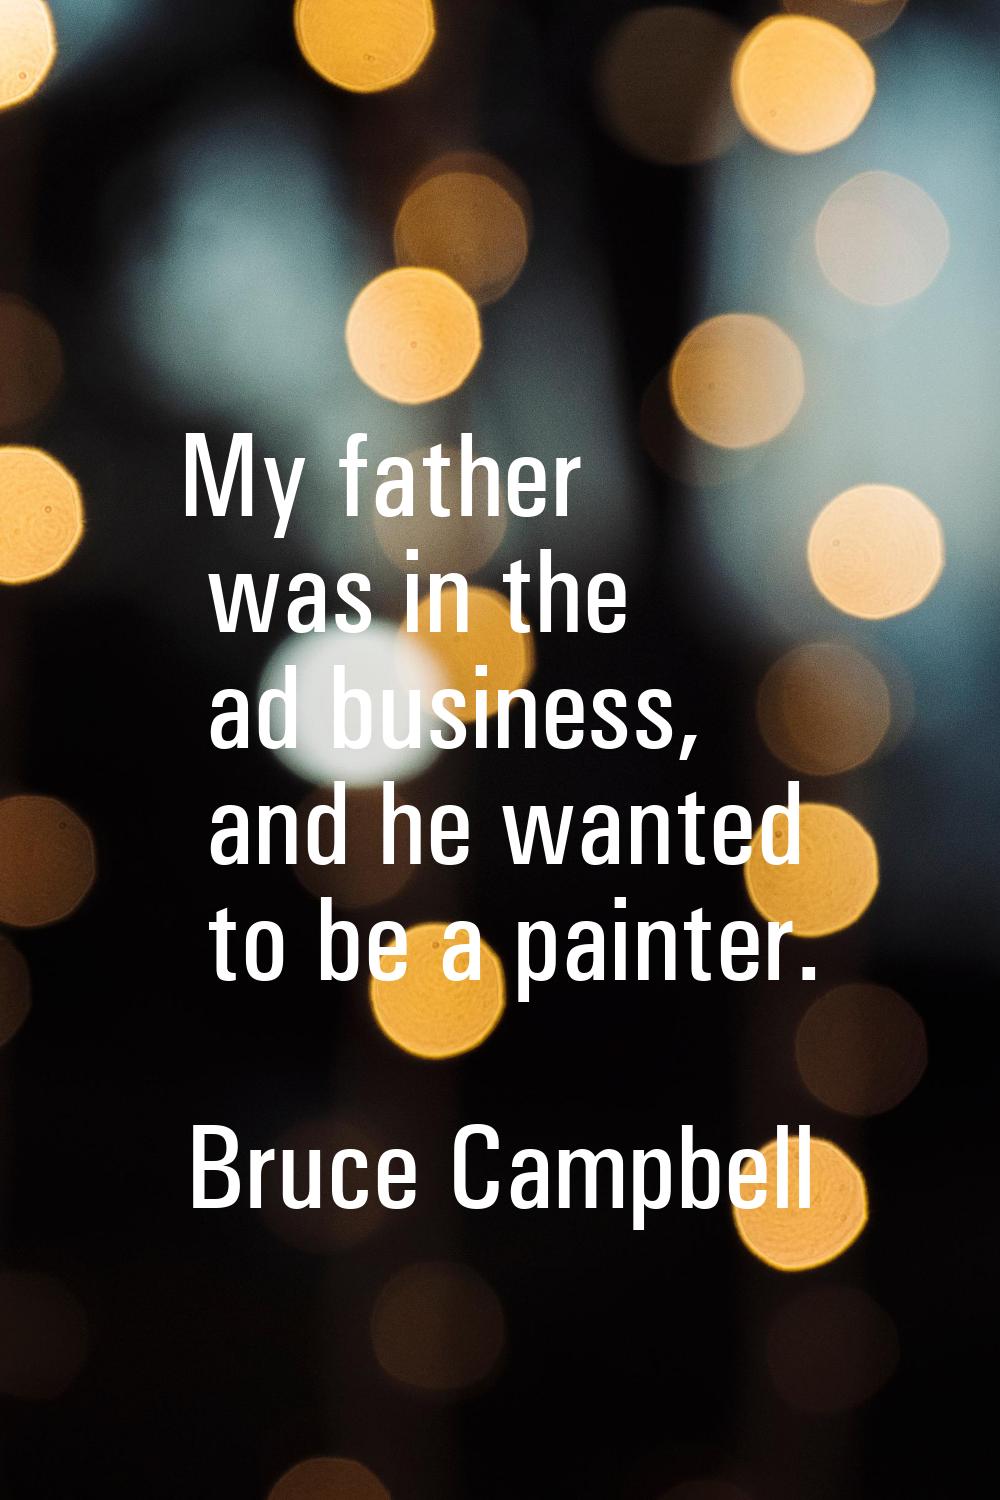 My father was in the ad business, and he wanted to be a painter.